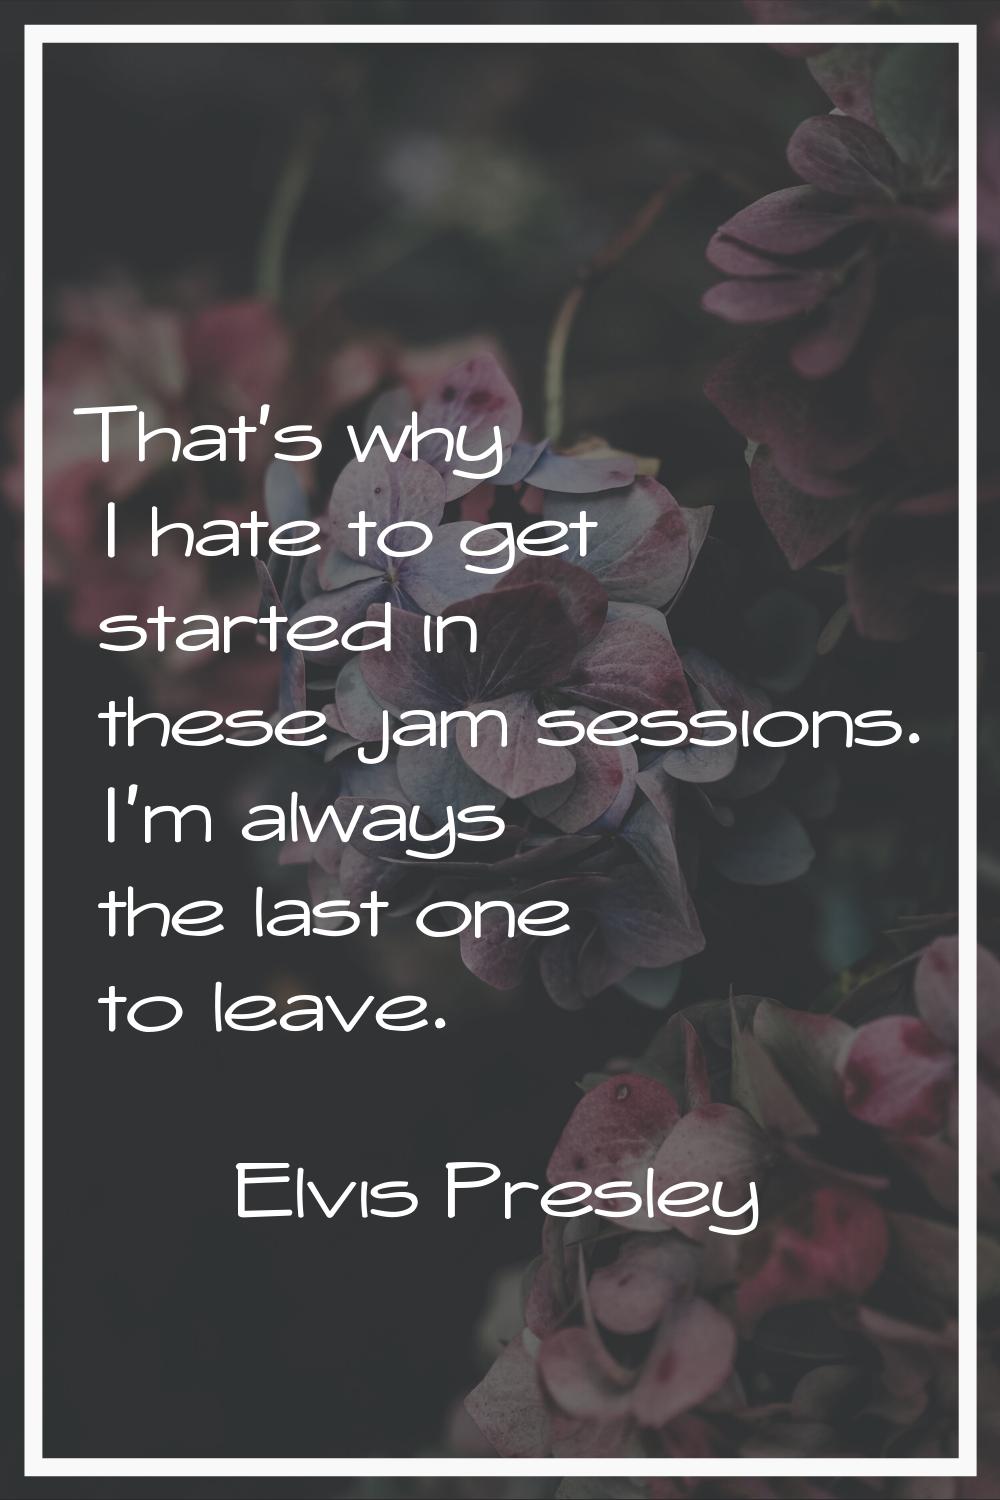 That's why I hate to get started in these jam sessions. I'm always the last one to leave.